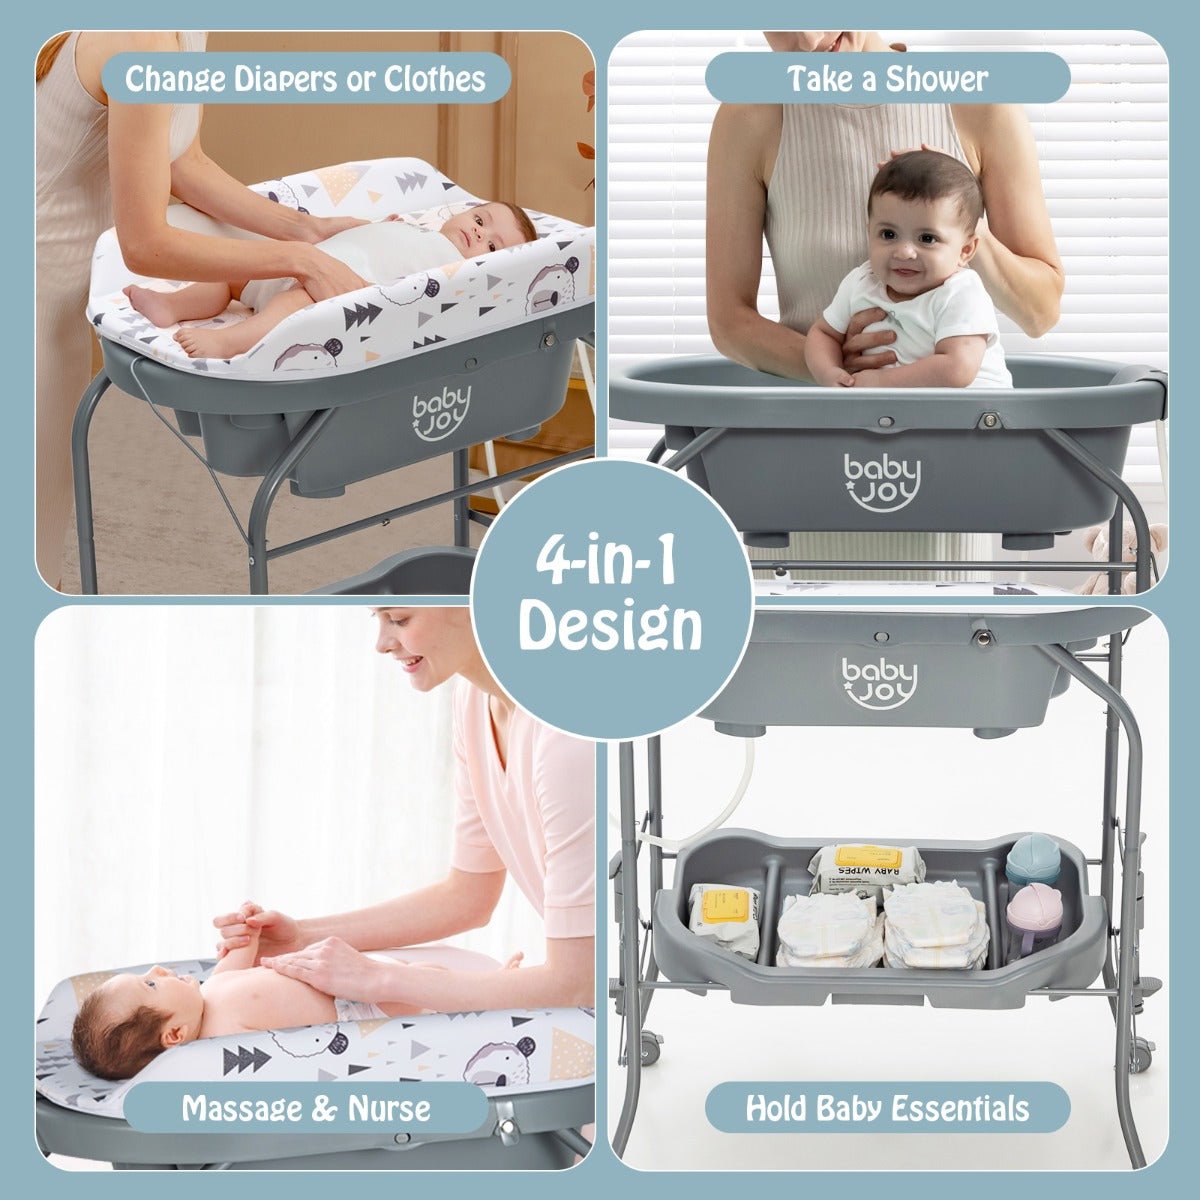 Safe and Practical: Grey Portable Baby Changing Table with Wheels